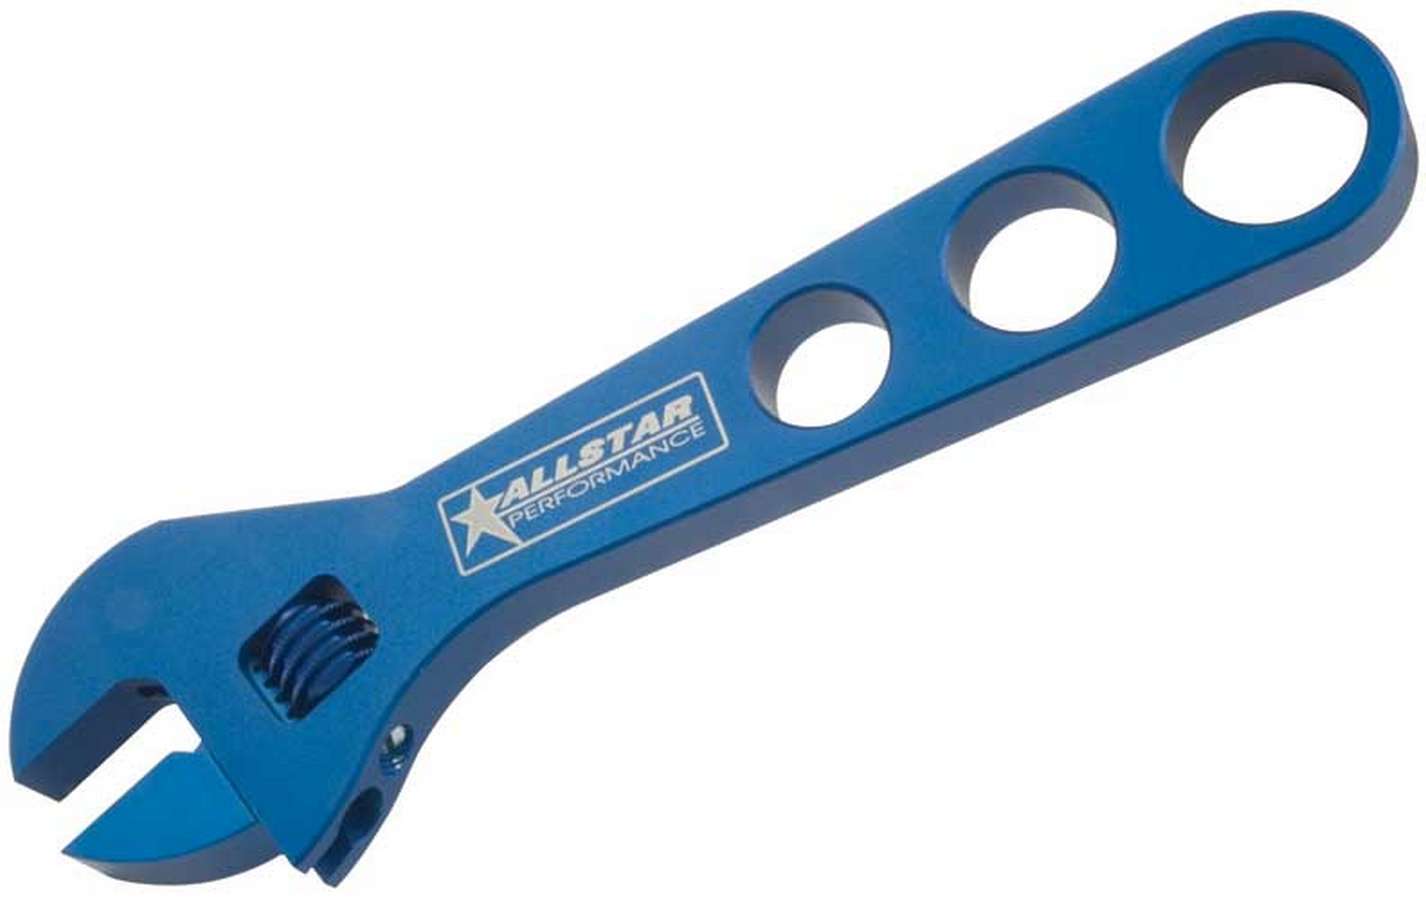 ALLSTAR, Adjustable AN Wrench, Single End, Up to 10 AN, 8 in Long, Aluminum, Blu